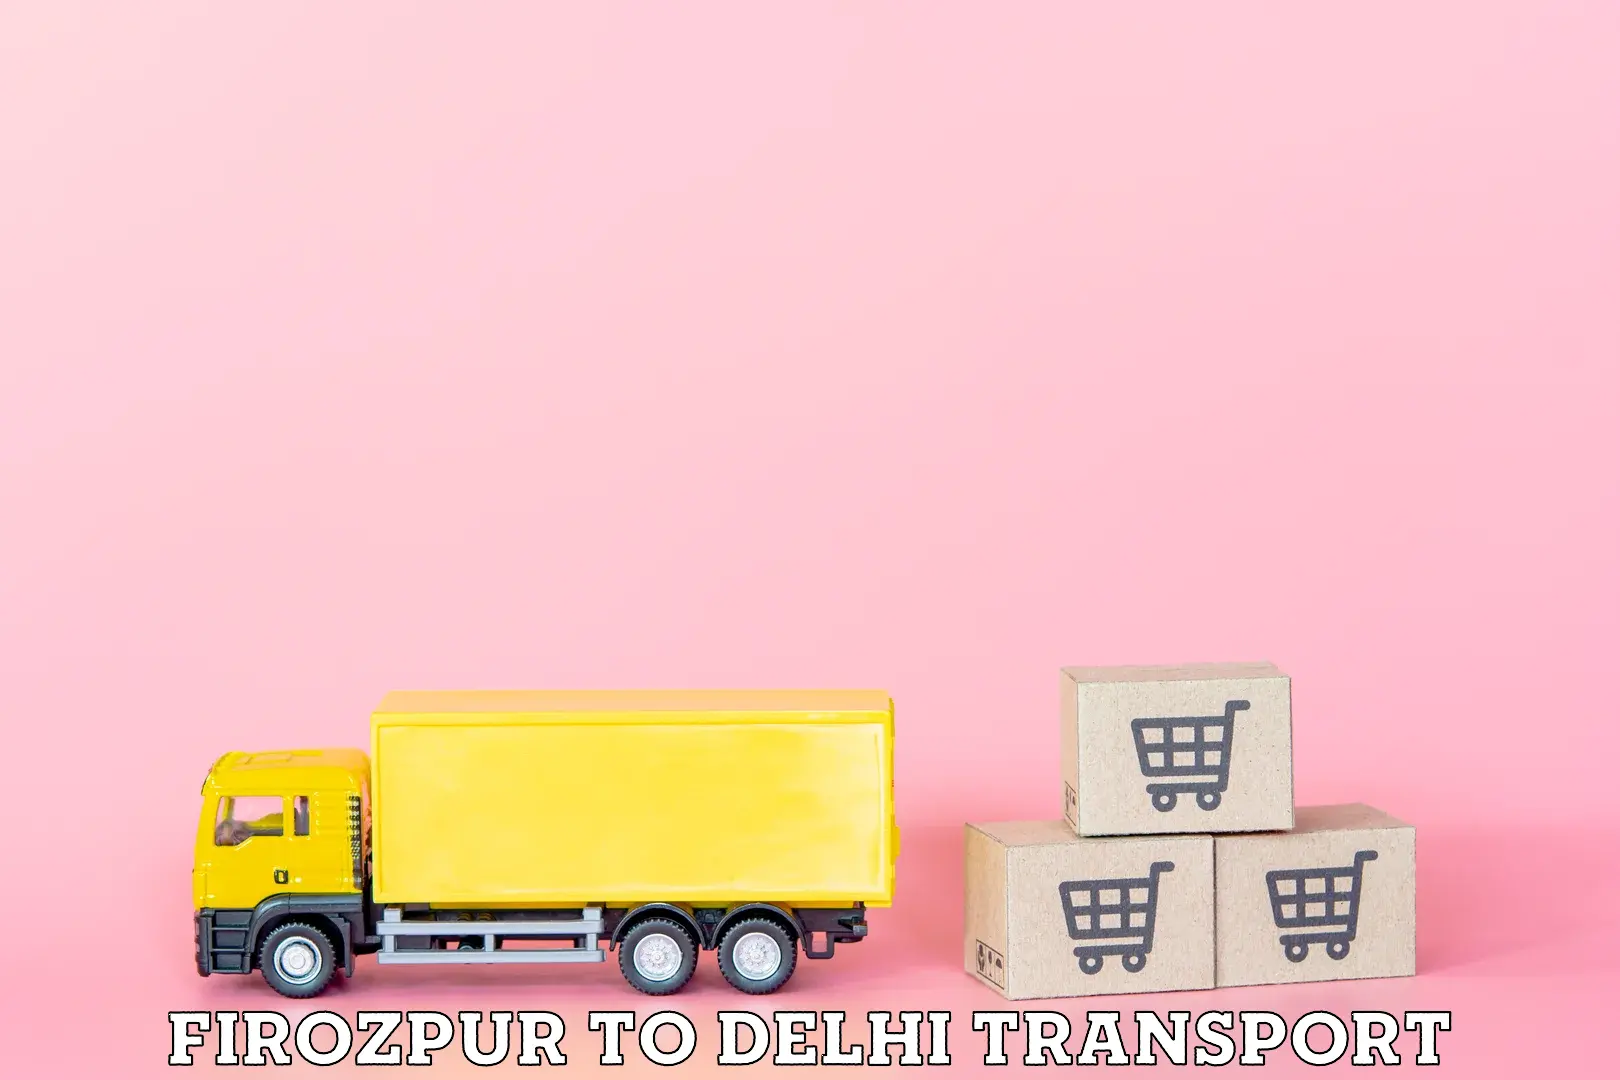 Transportation solution services Firozpur to Lodhi Road